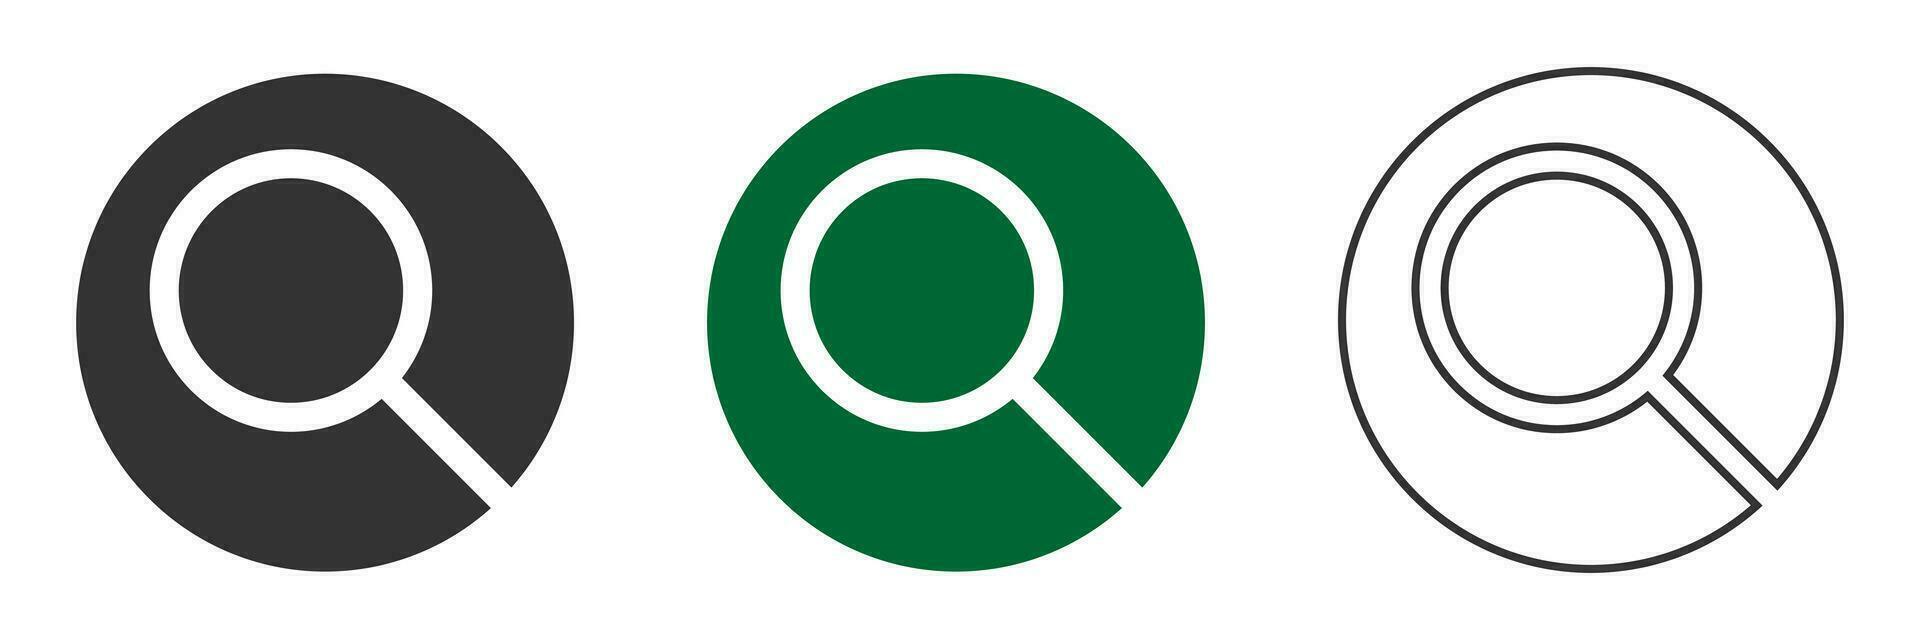 Search  icon. Black, green, white magnifying glass symbol. Sign app button vector. vector